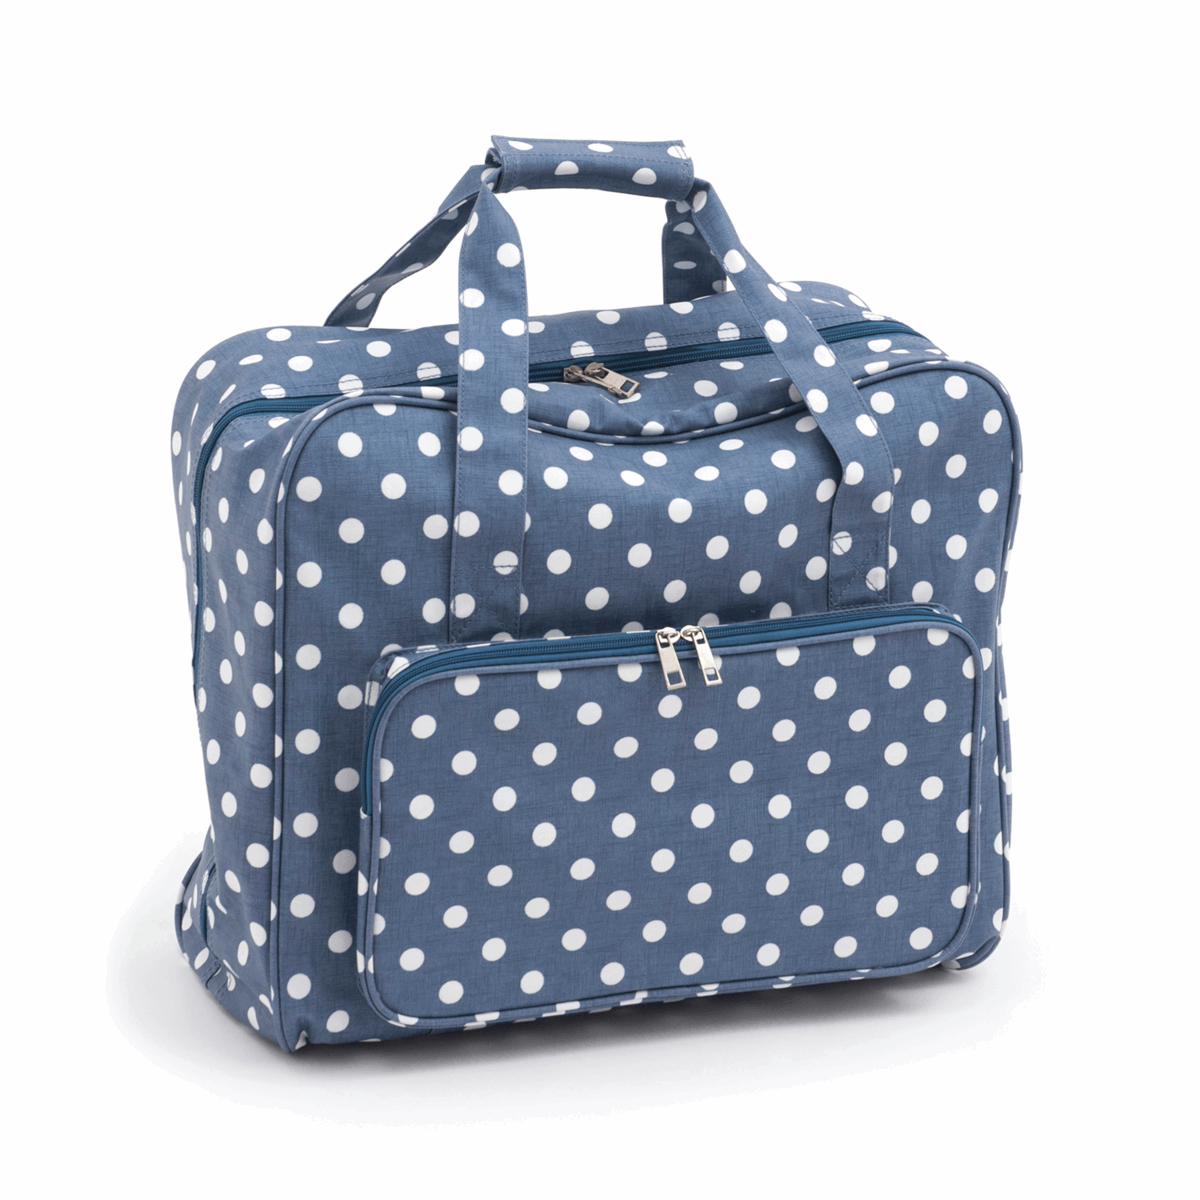 Hobby Gift PVC Sewing Machine Bags at Freckles and Co Sewing denim polka dot